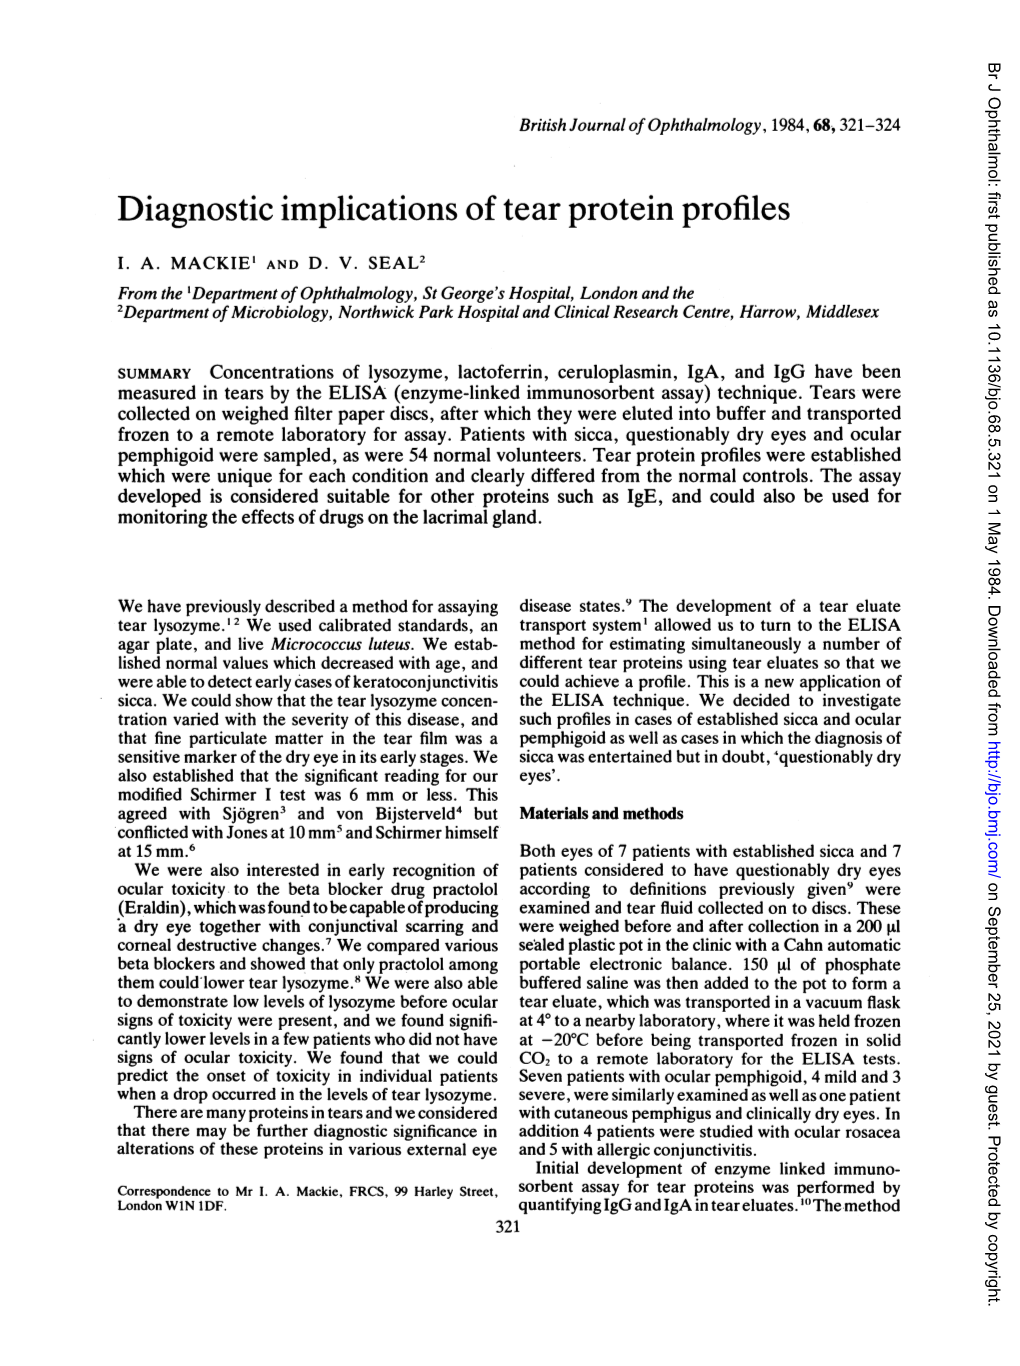 Diagnostic Implications Oftear Protein Profiles